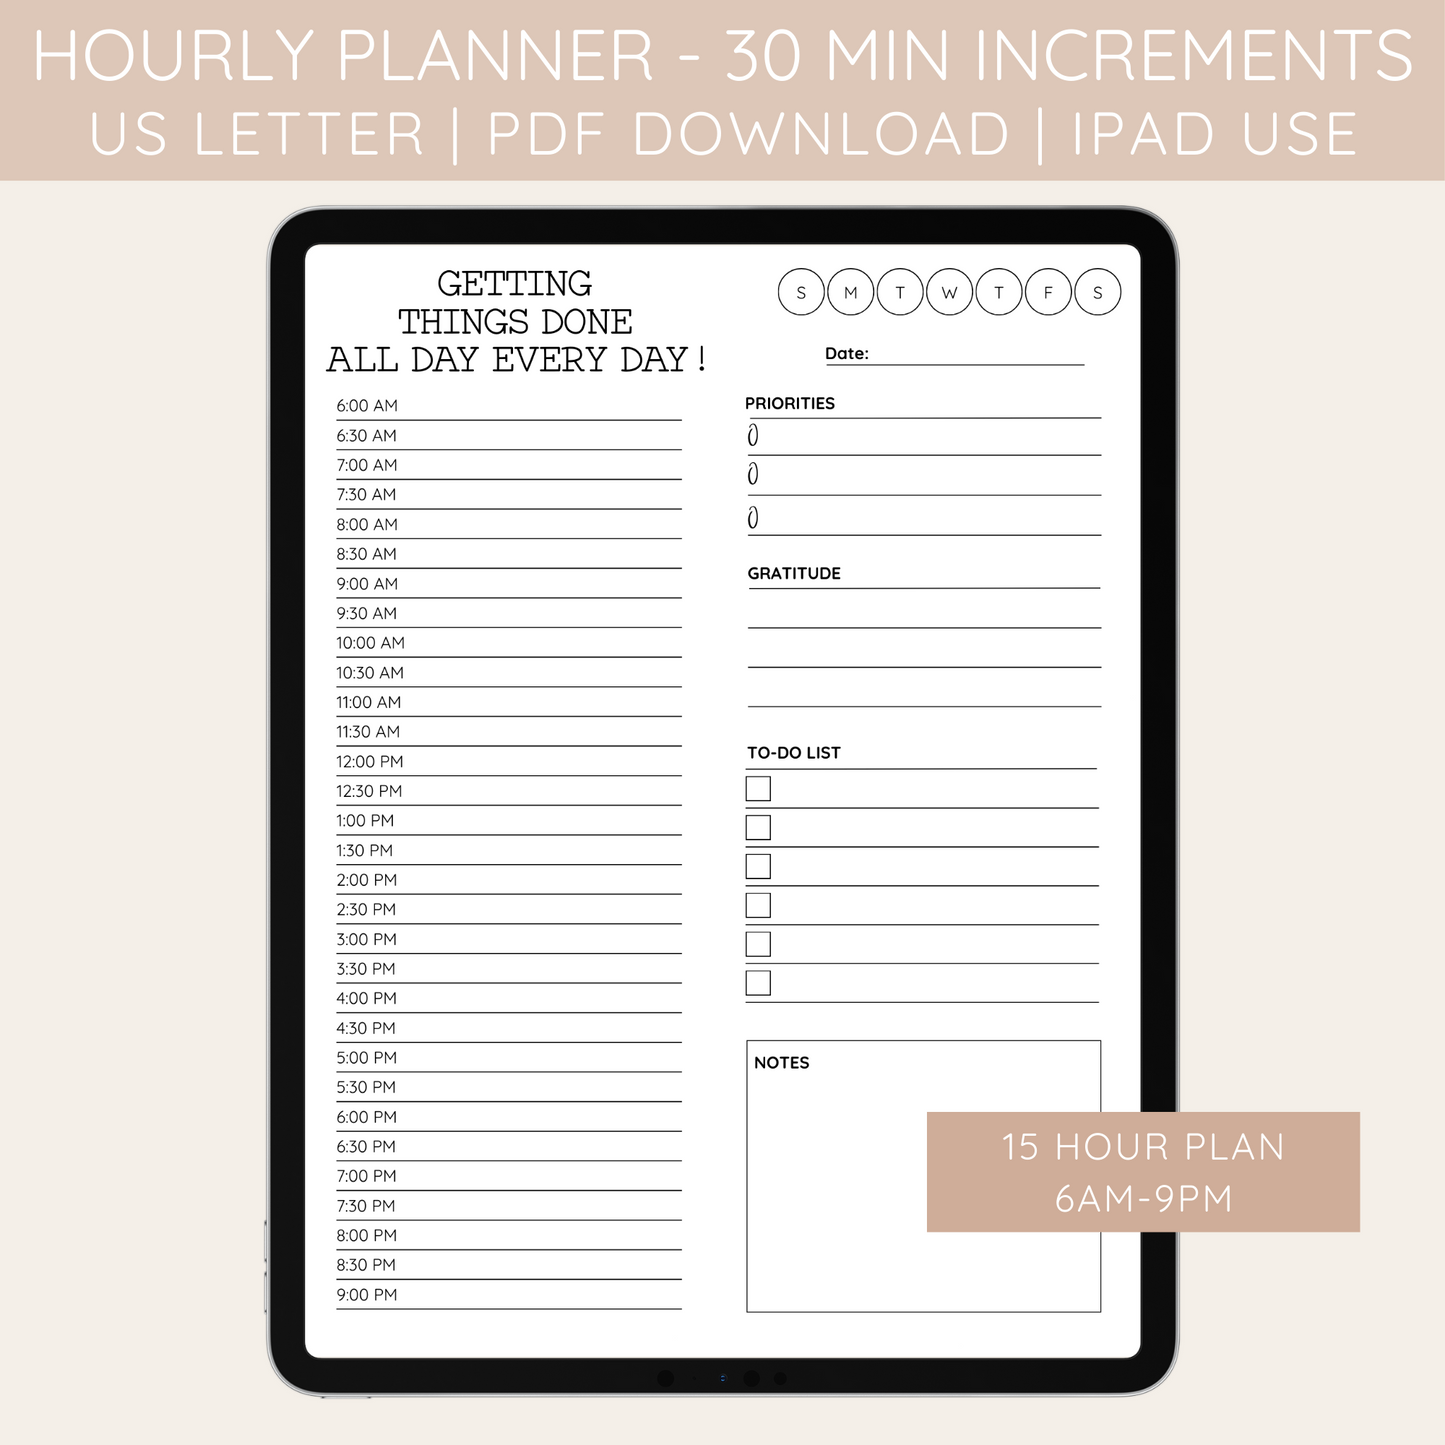 Daily Plan 30-Minute Increments